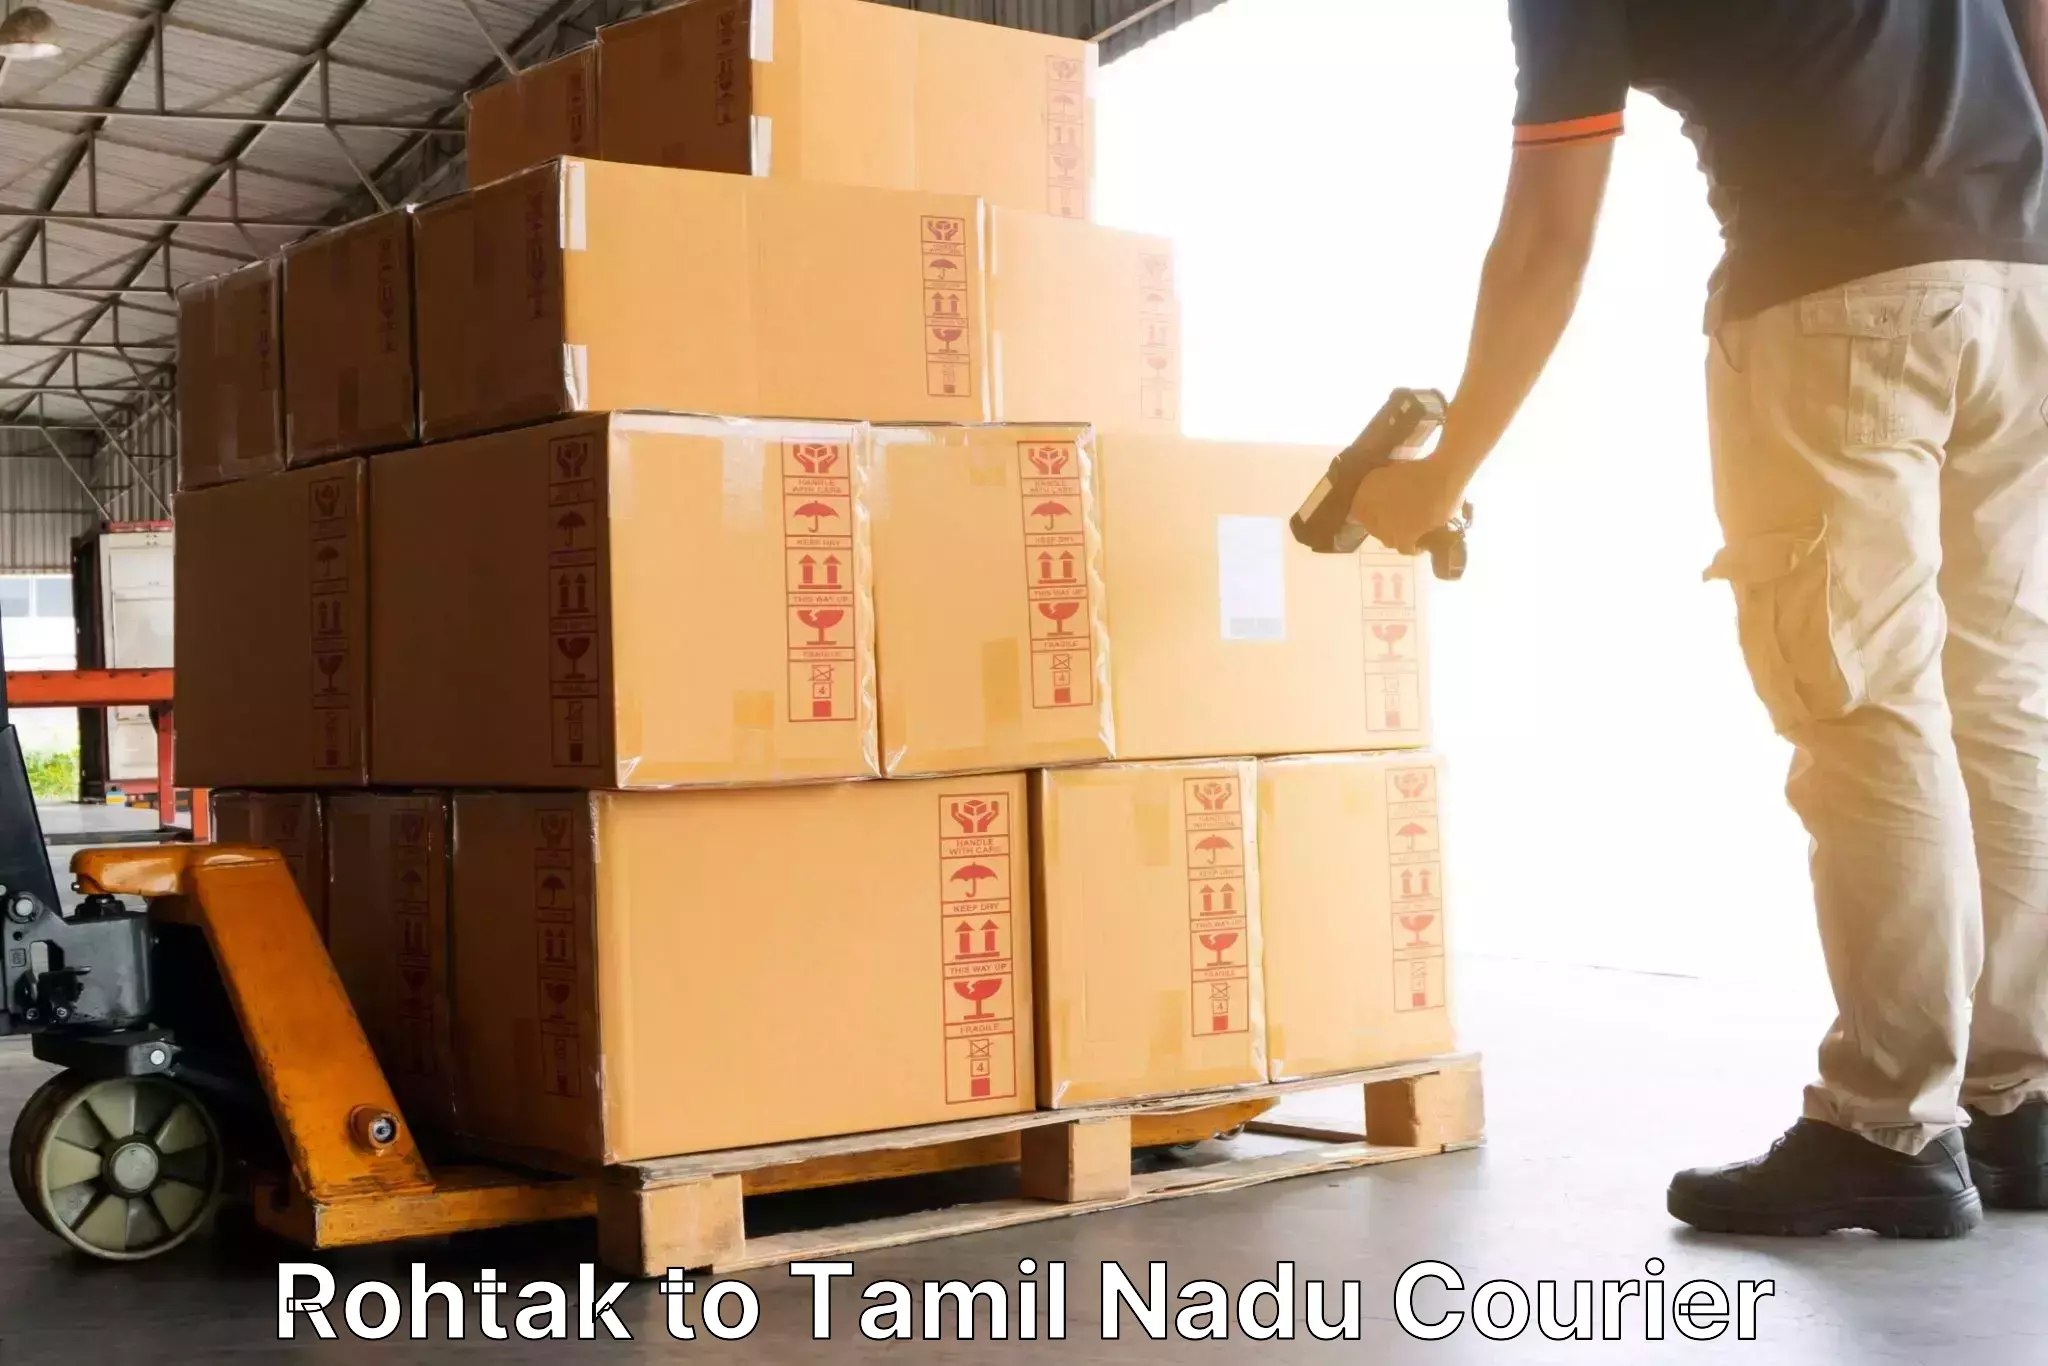 Next-day delivery options Rohtak to Tamil Nadu